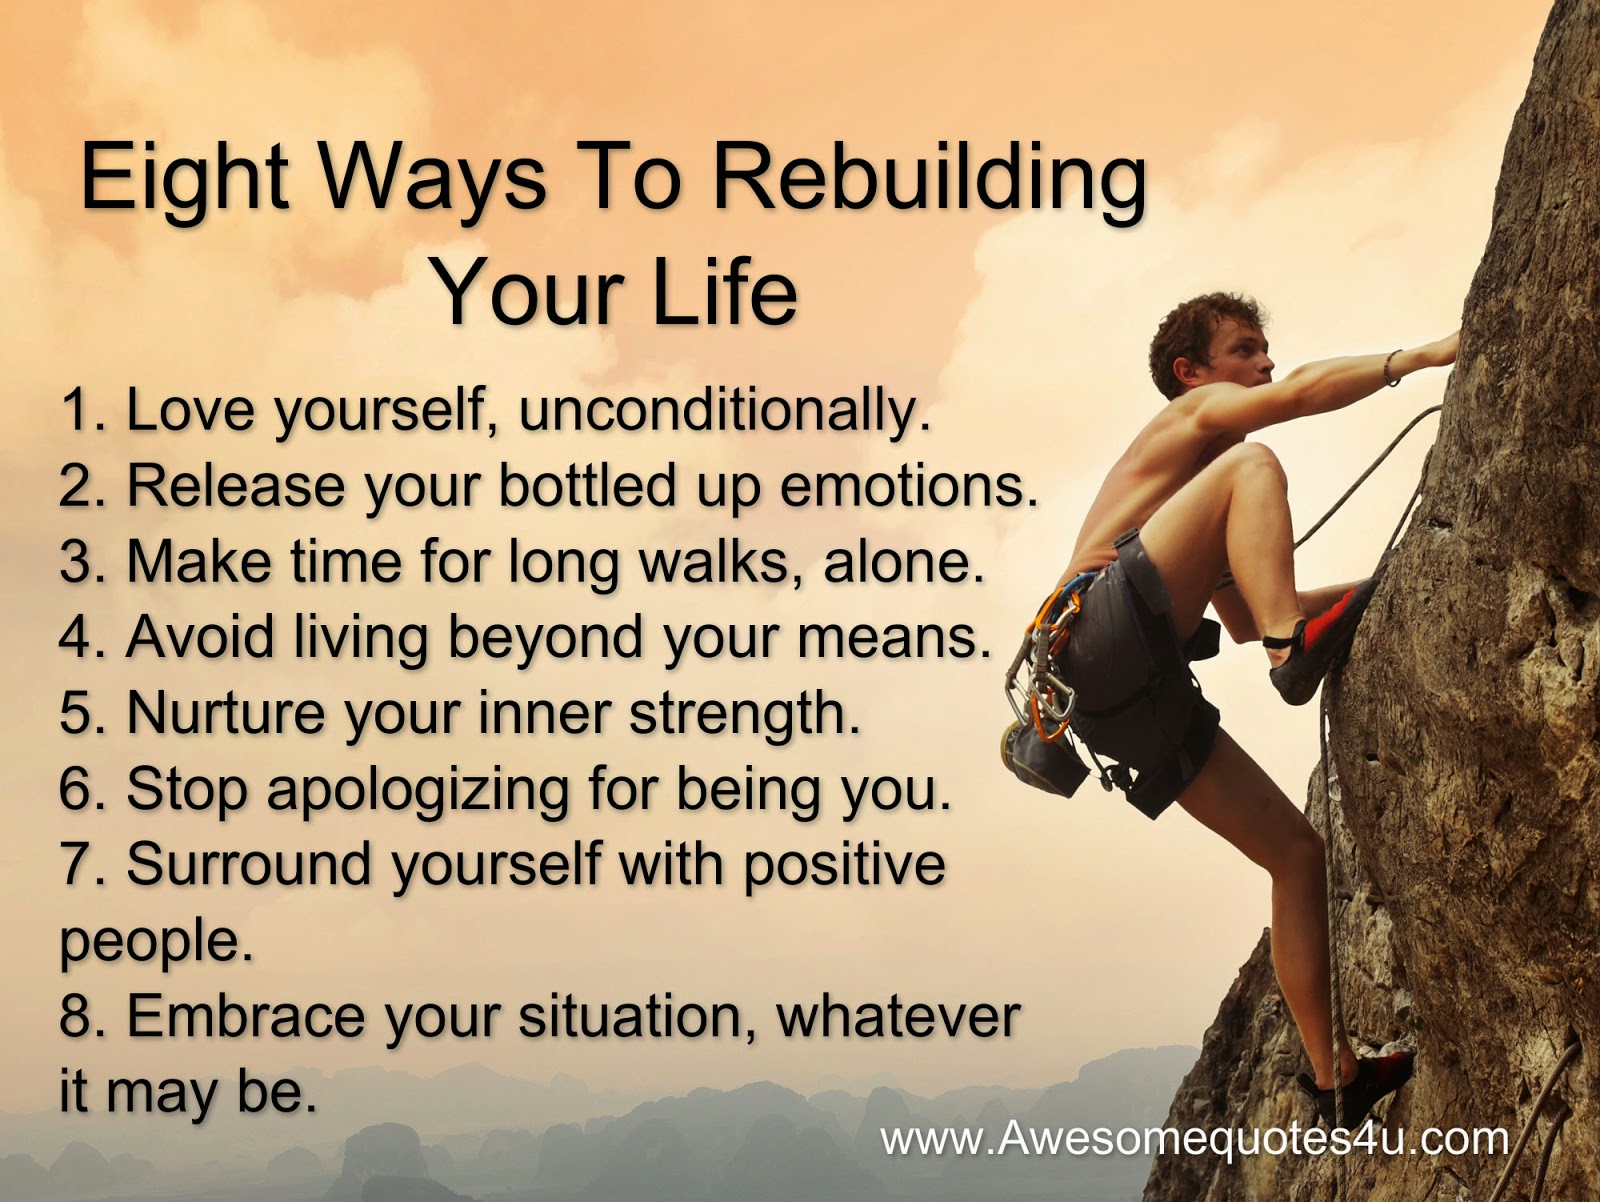 Awesome Quotes 8 Ways To Rebuilding Your Life